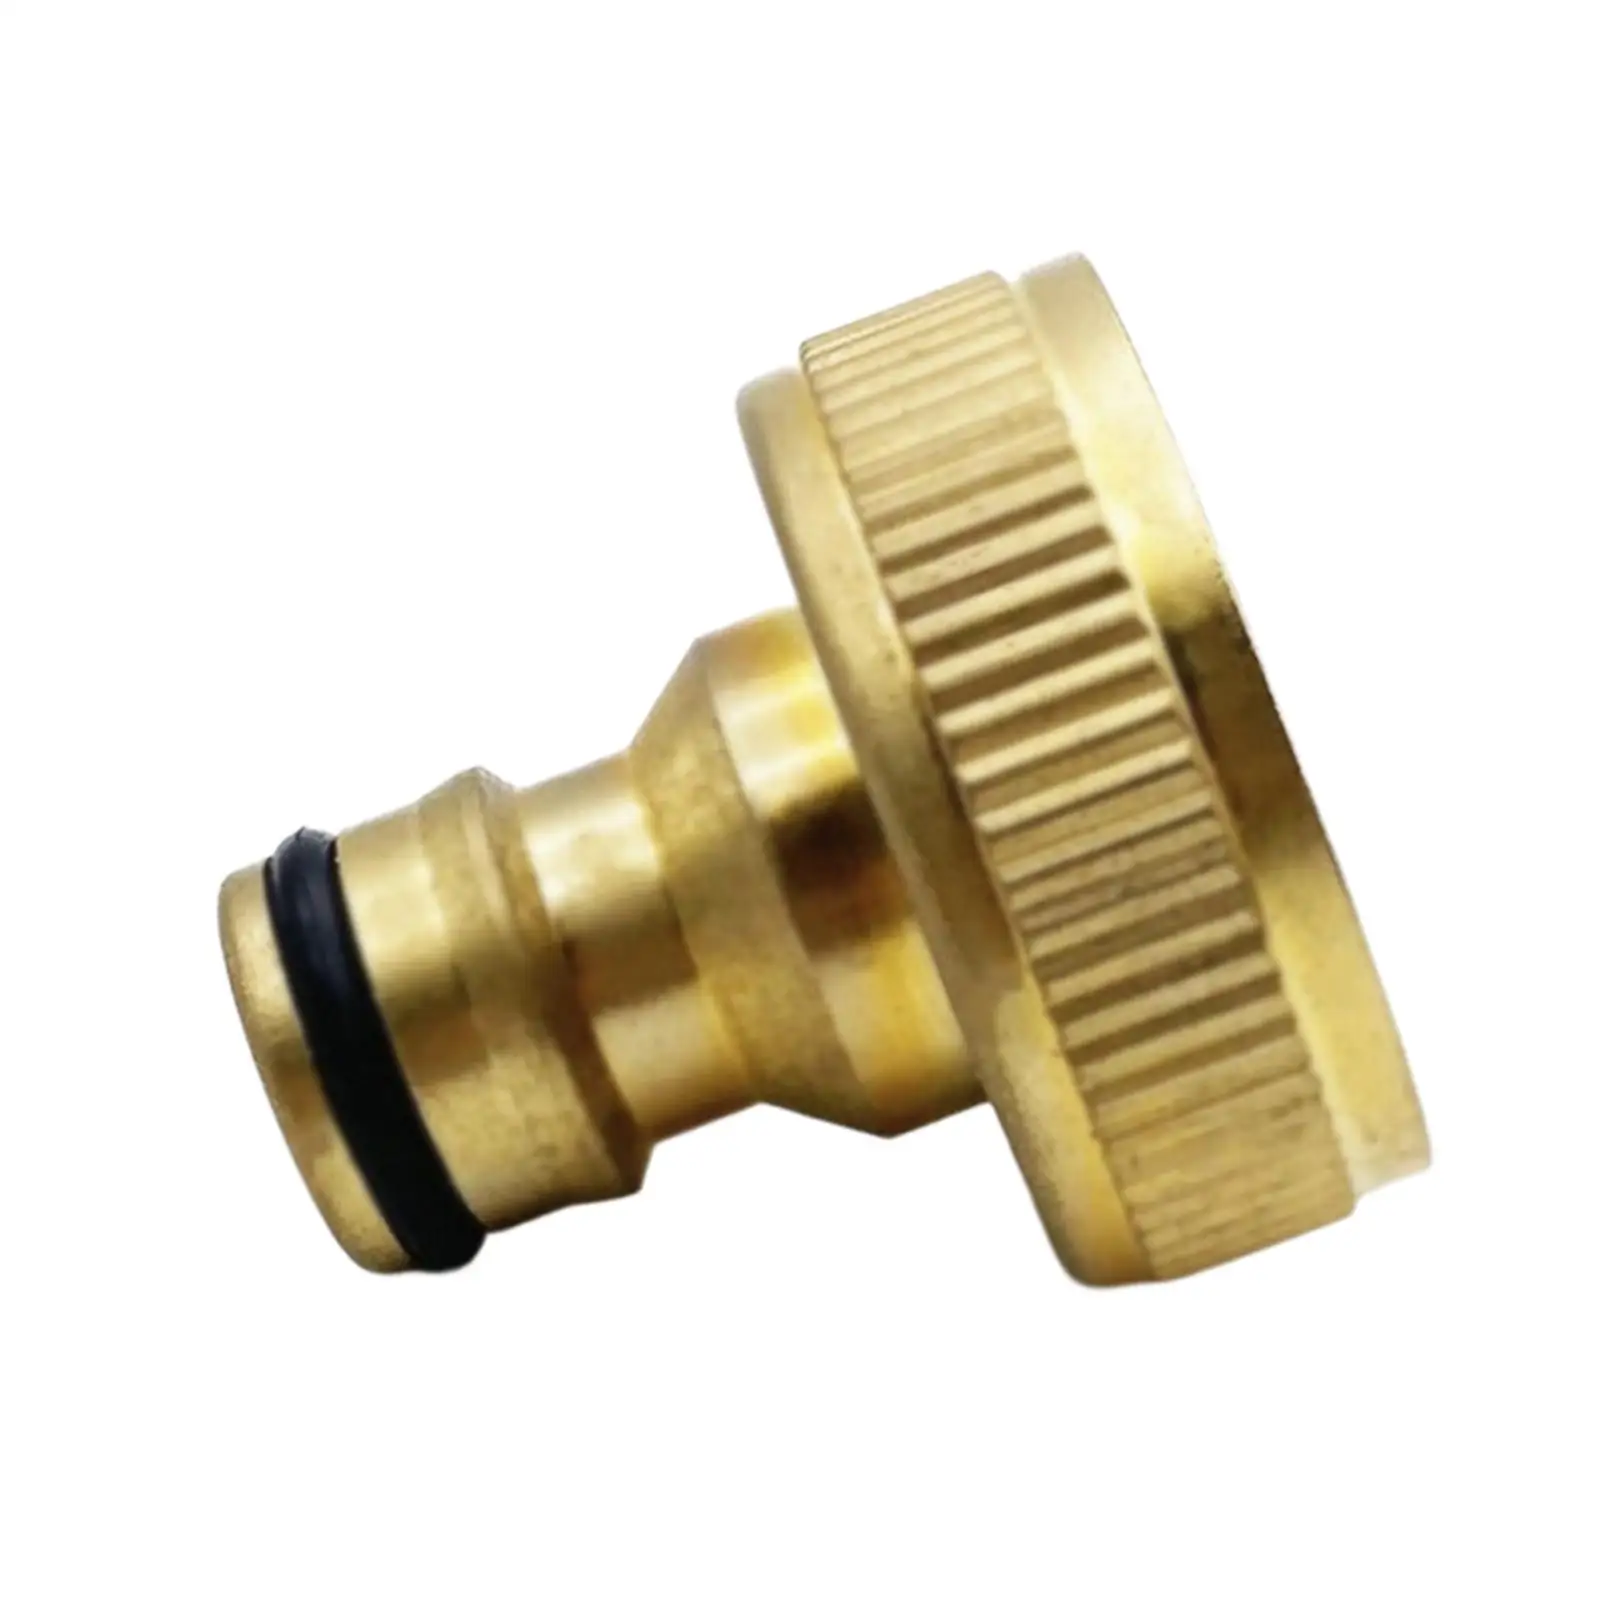 Fitting Adapter 1inch Power Tool Quickly Connect Pressure Washers Part